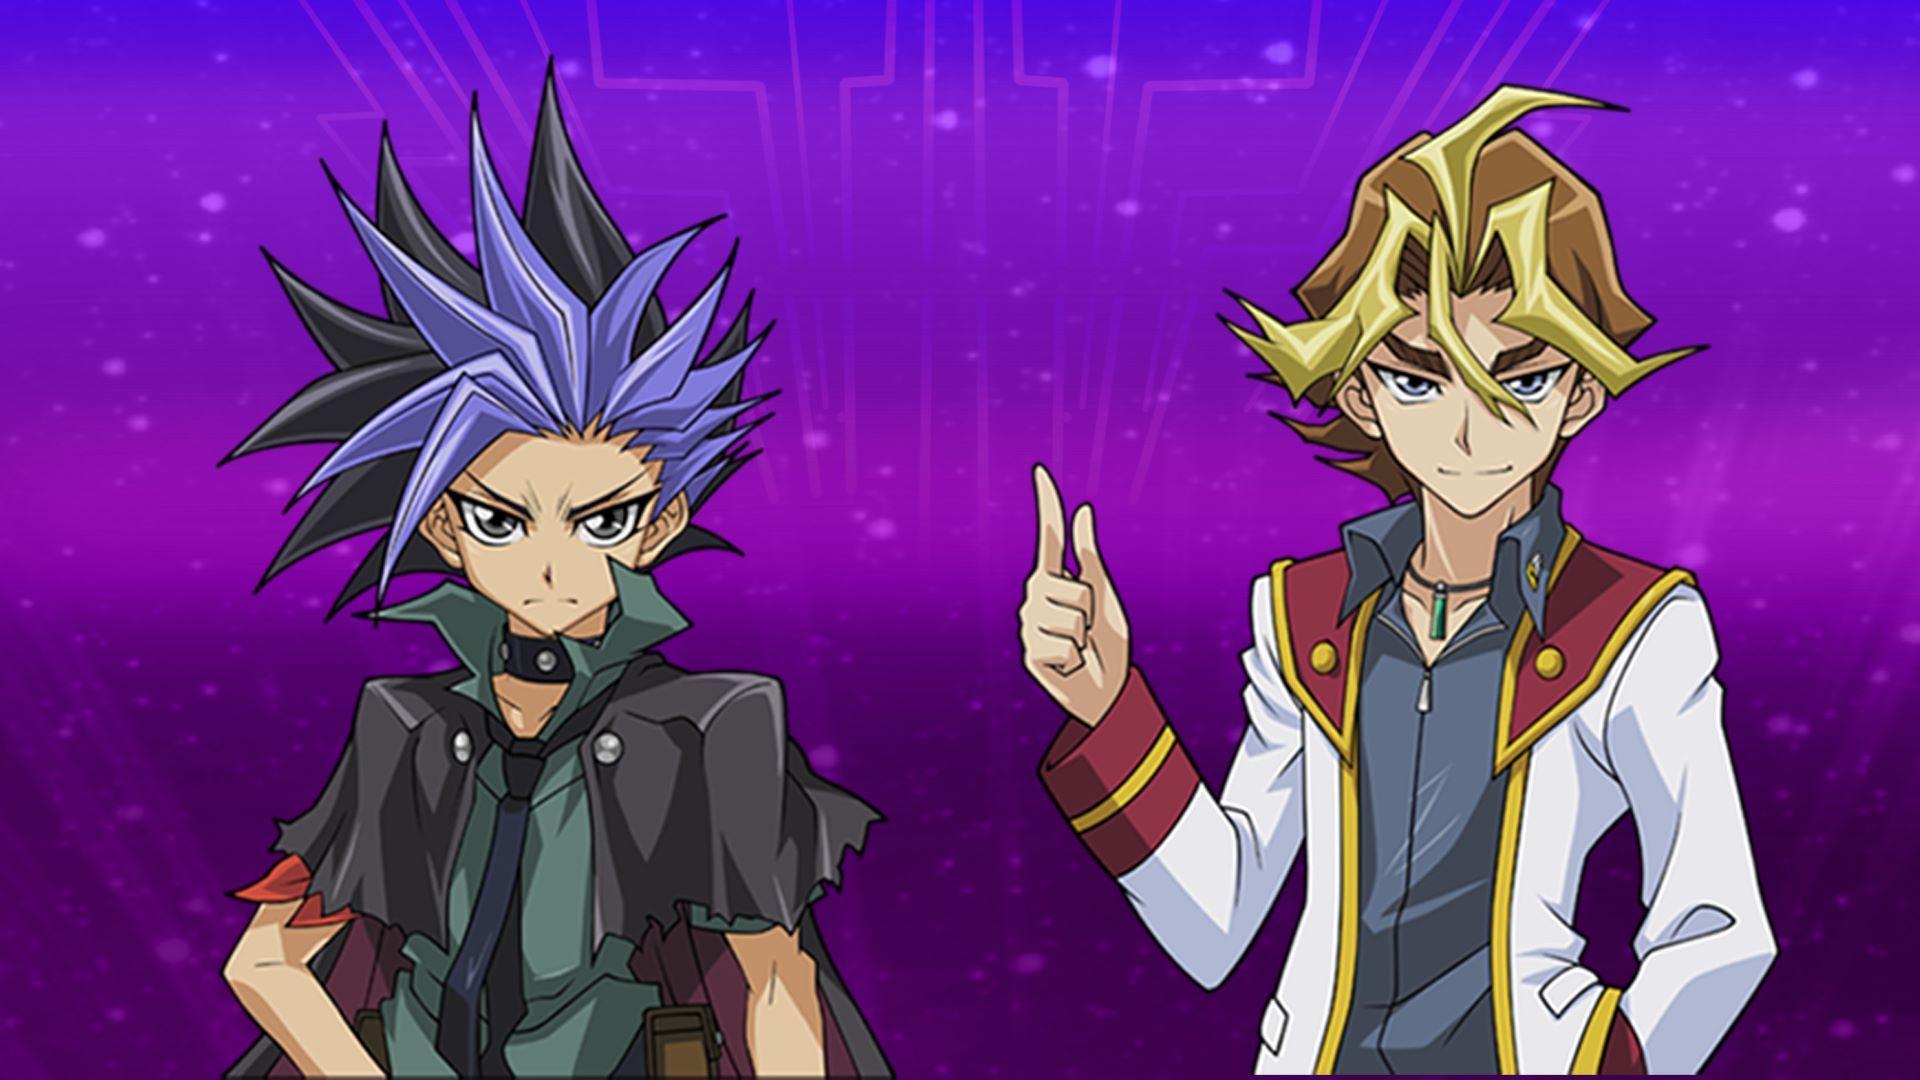 yugioh! arcv wallpapers wallpaper cave on yu gi oh arc v wallpapers